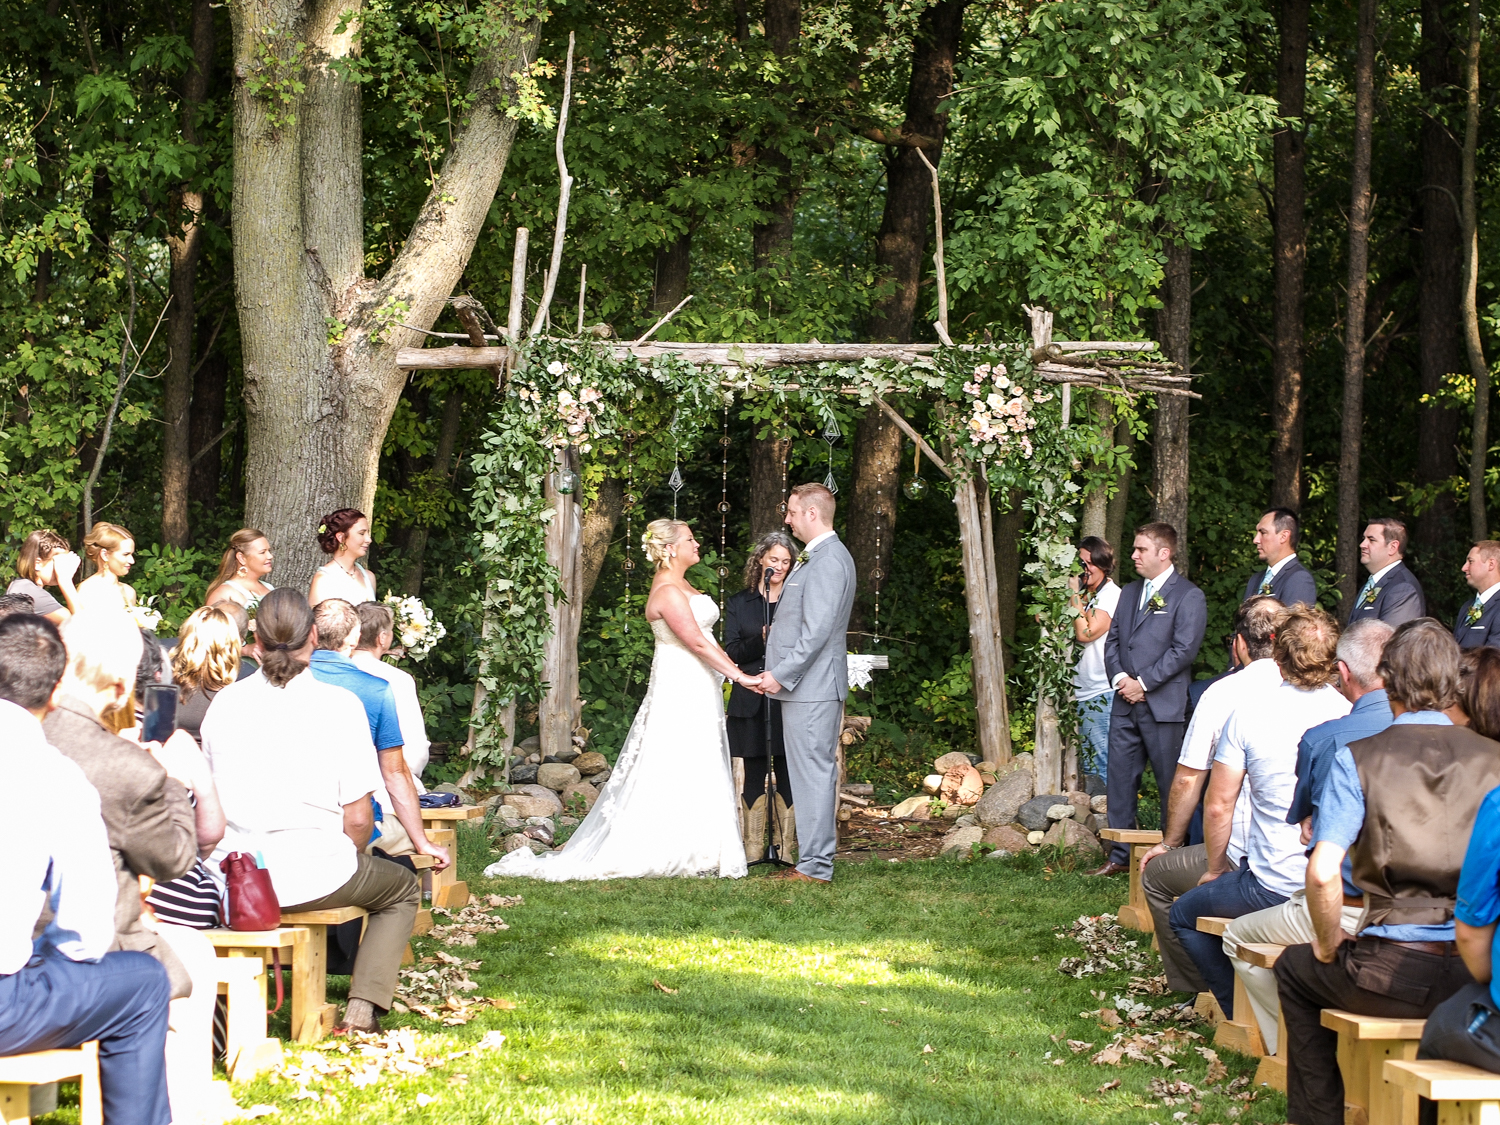 Wedding in the Woods at The Gardens